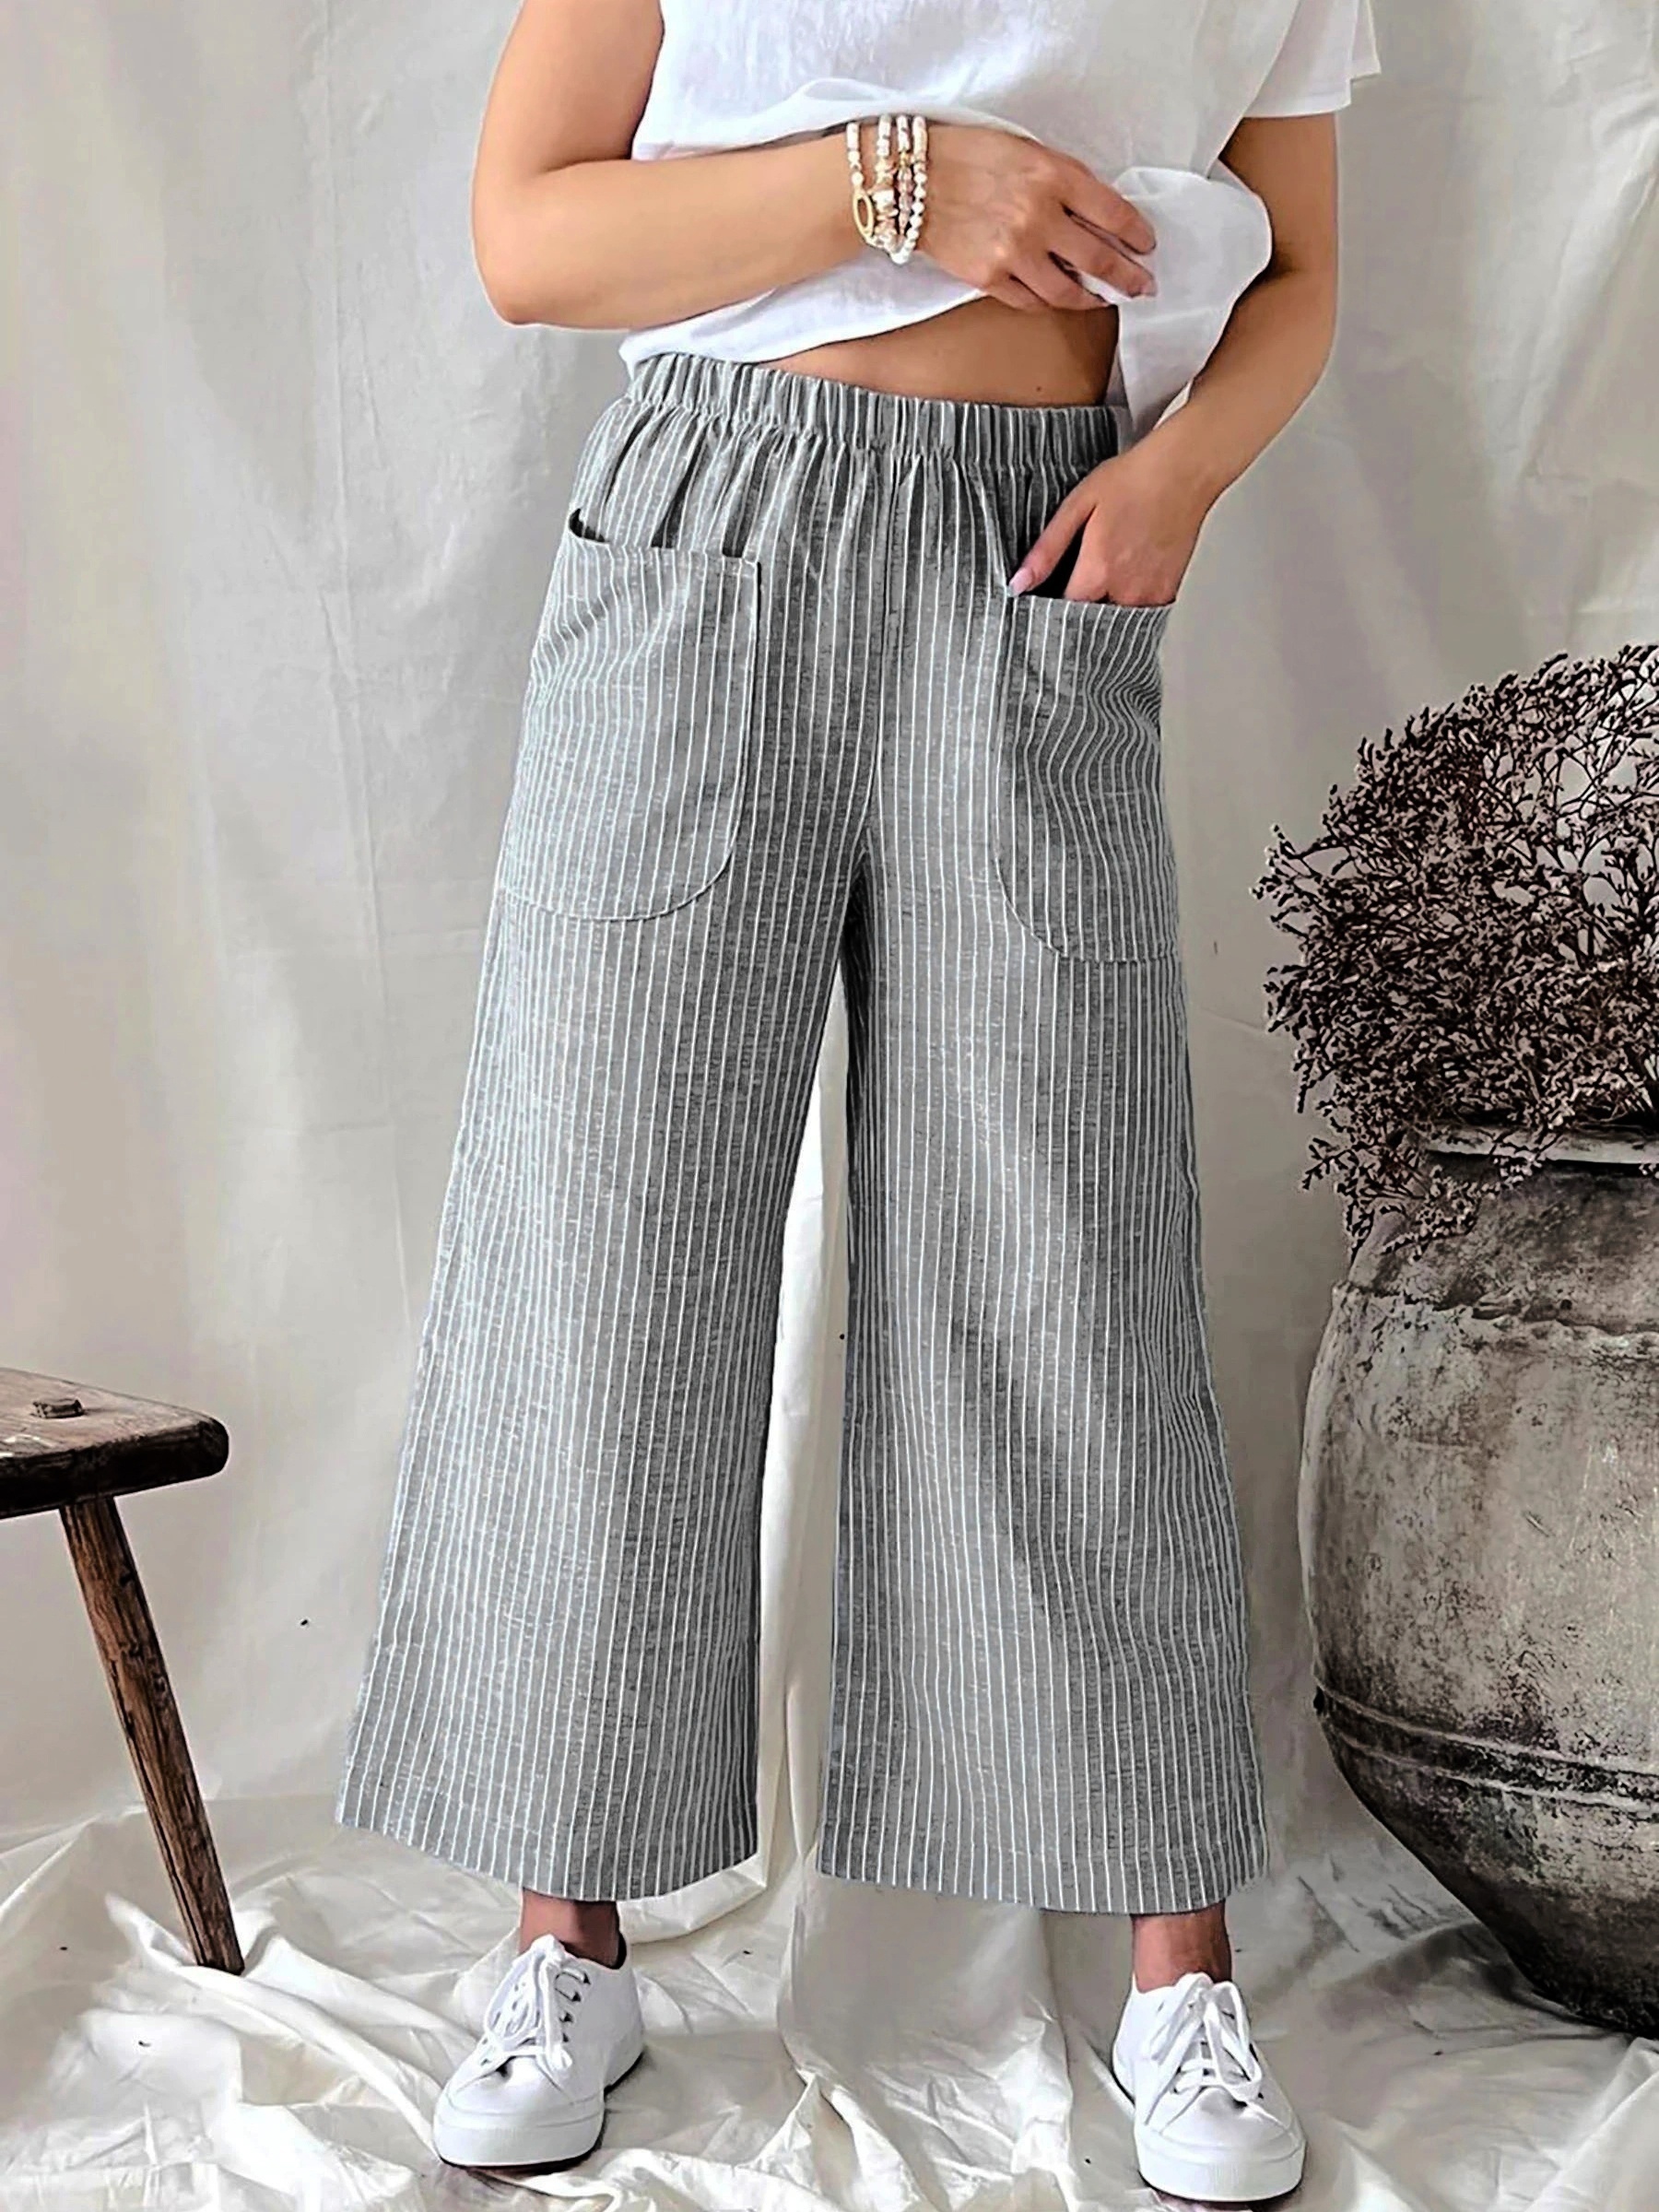 Womens's Casual Pants for Work Womens FFashion Cotton And Linen Pants  Elastic Waist Casual Pants Pocket Pants Tall Trousers